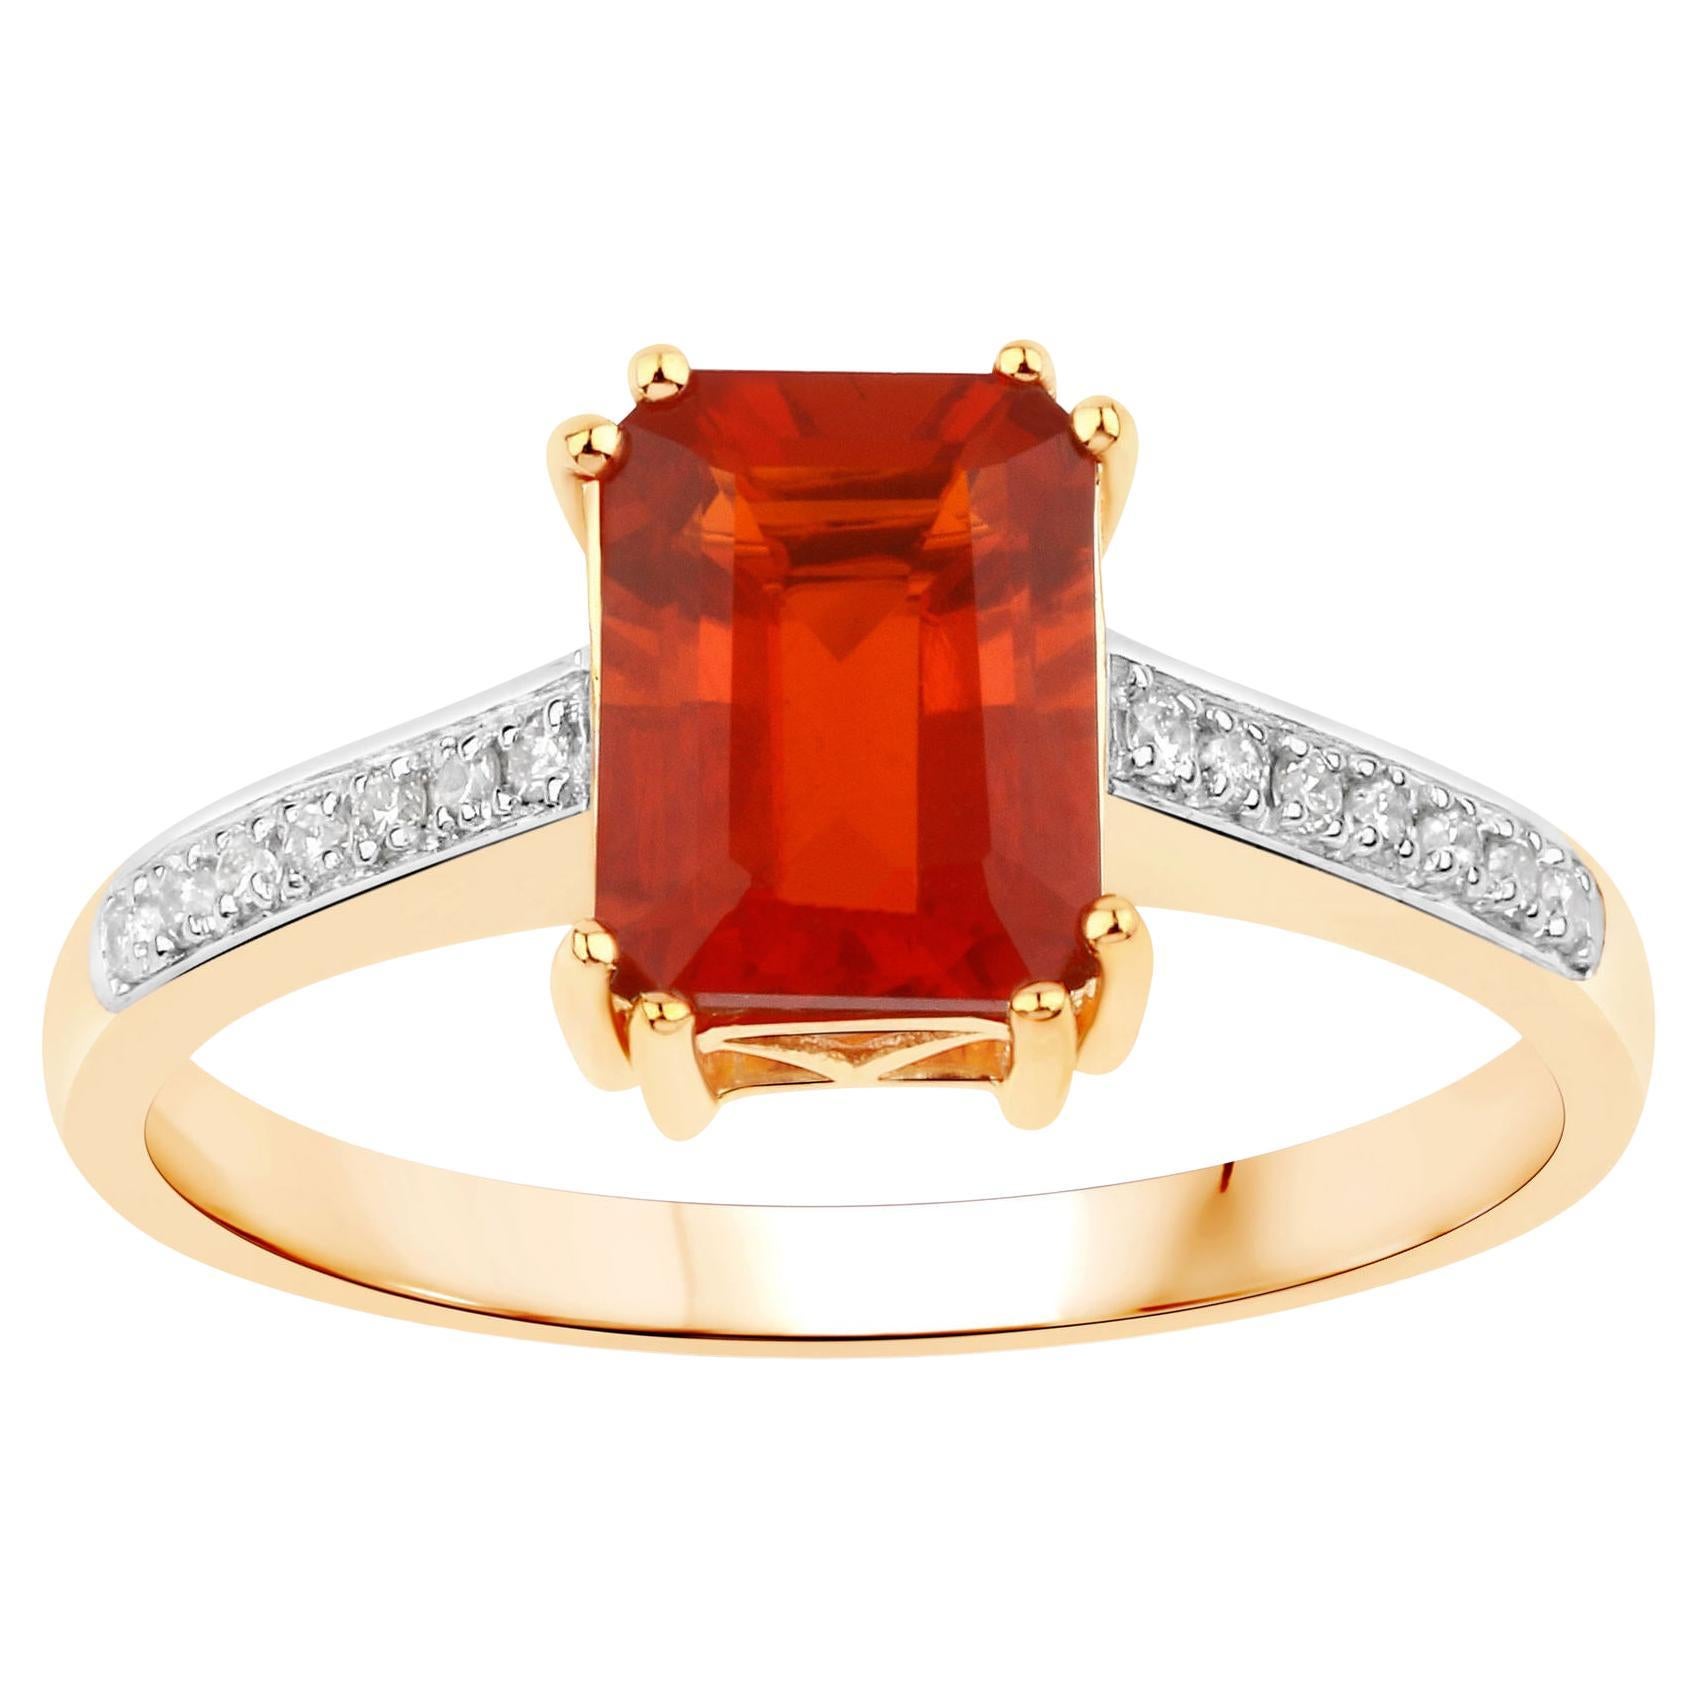 Natural Fire Opal and Diamond Ring 1.11 Carats 14K Yellow Gold For Sale